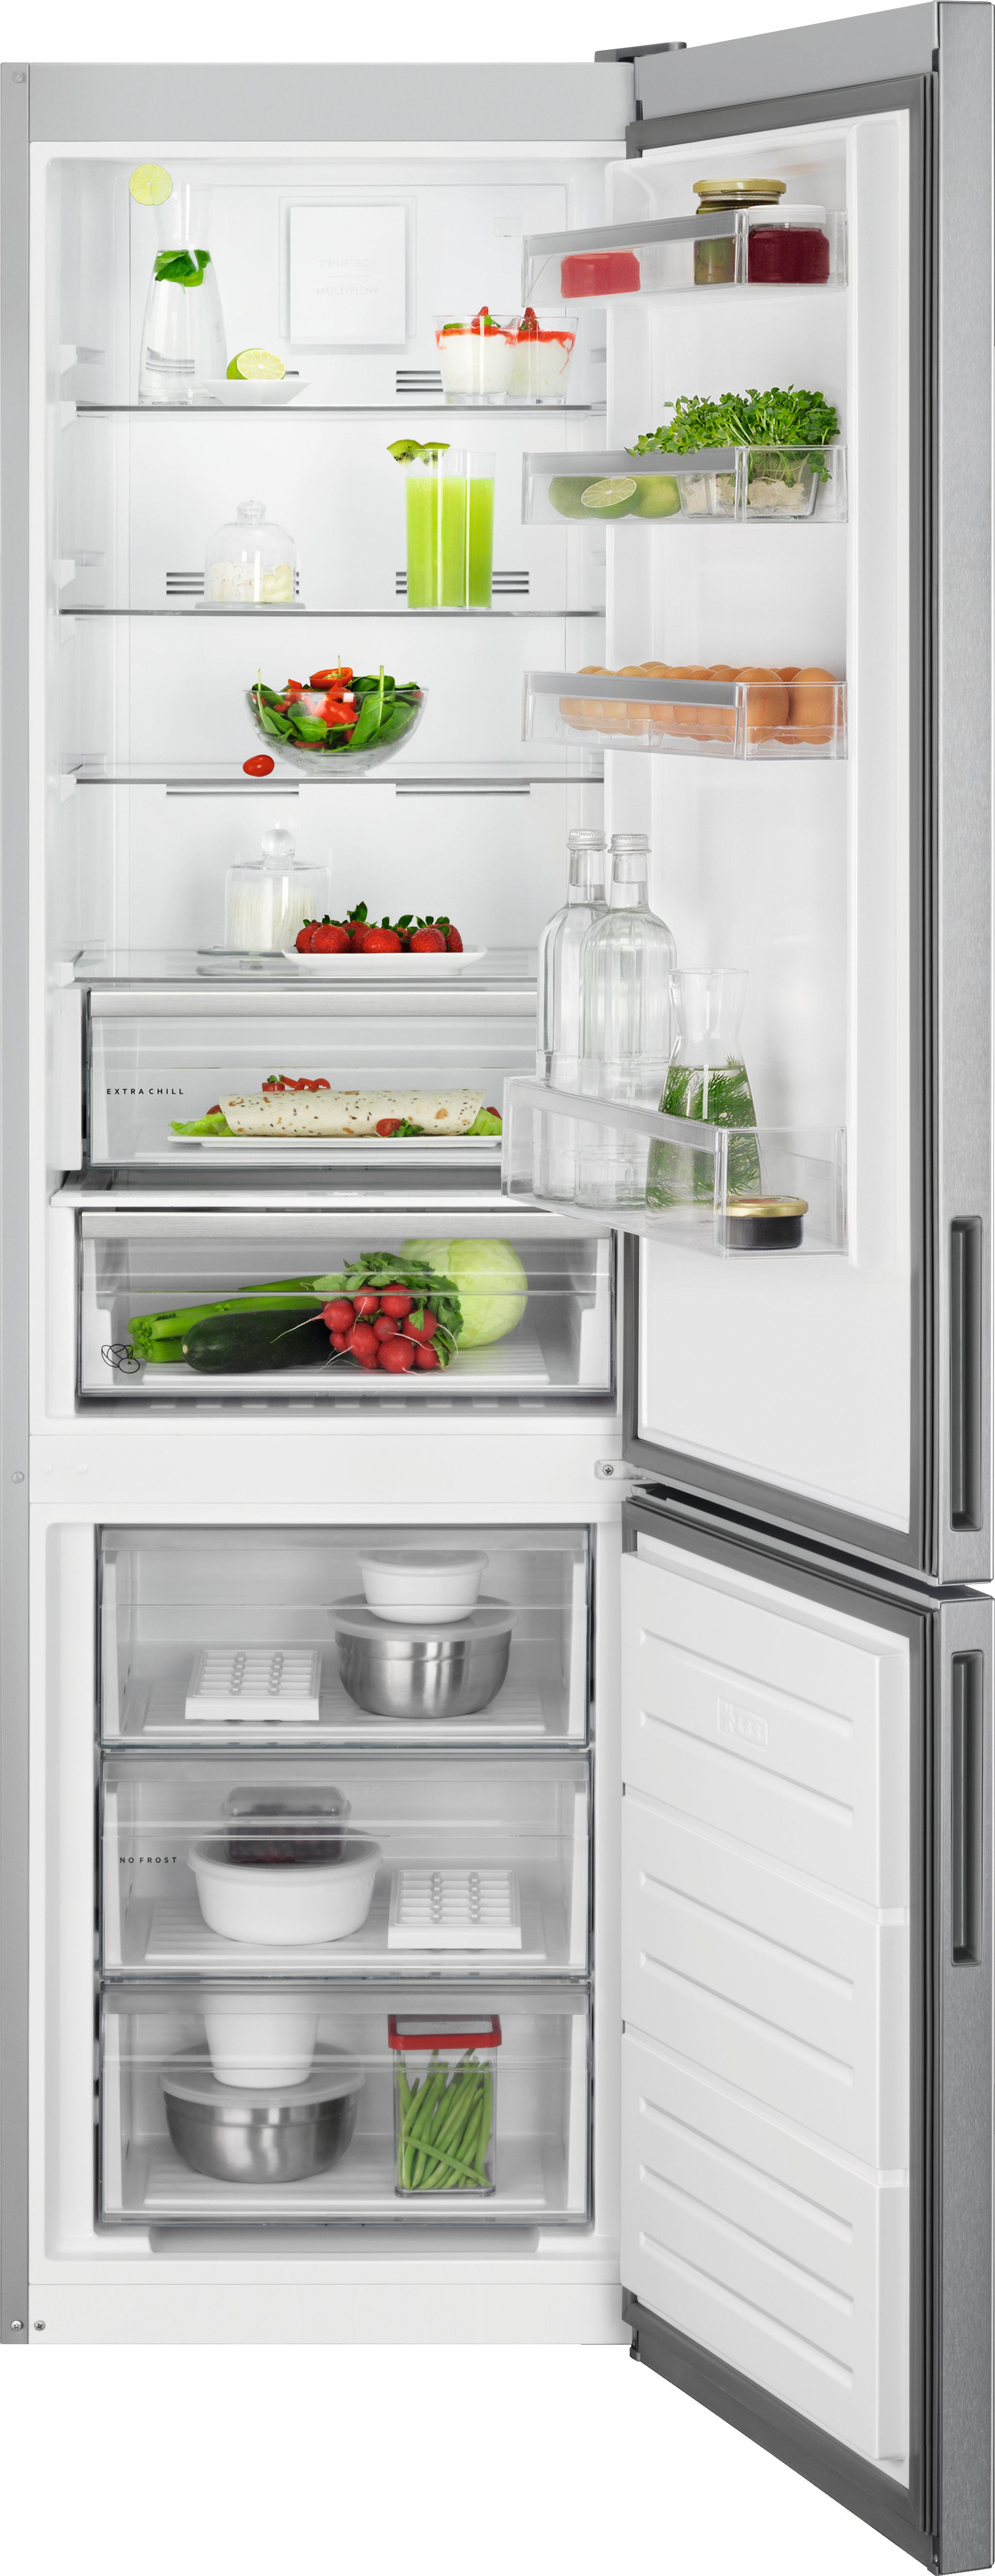 AEG 6000 TwinTech RCB636E2MX 70/30 No Frost Fridge Freezer - Stainless Steel - E Rated, Stainless Steel